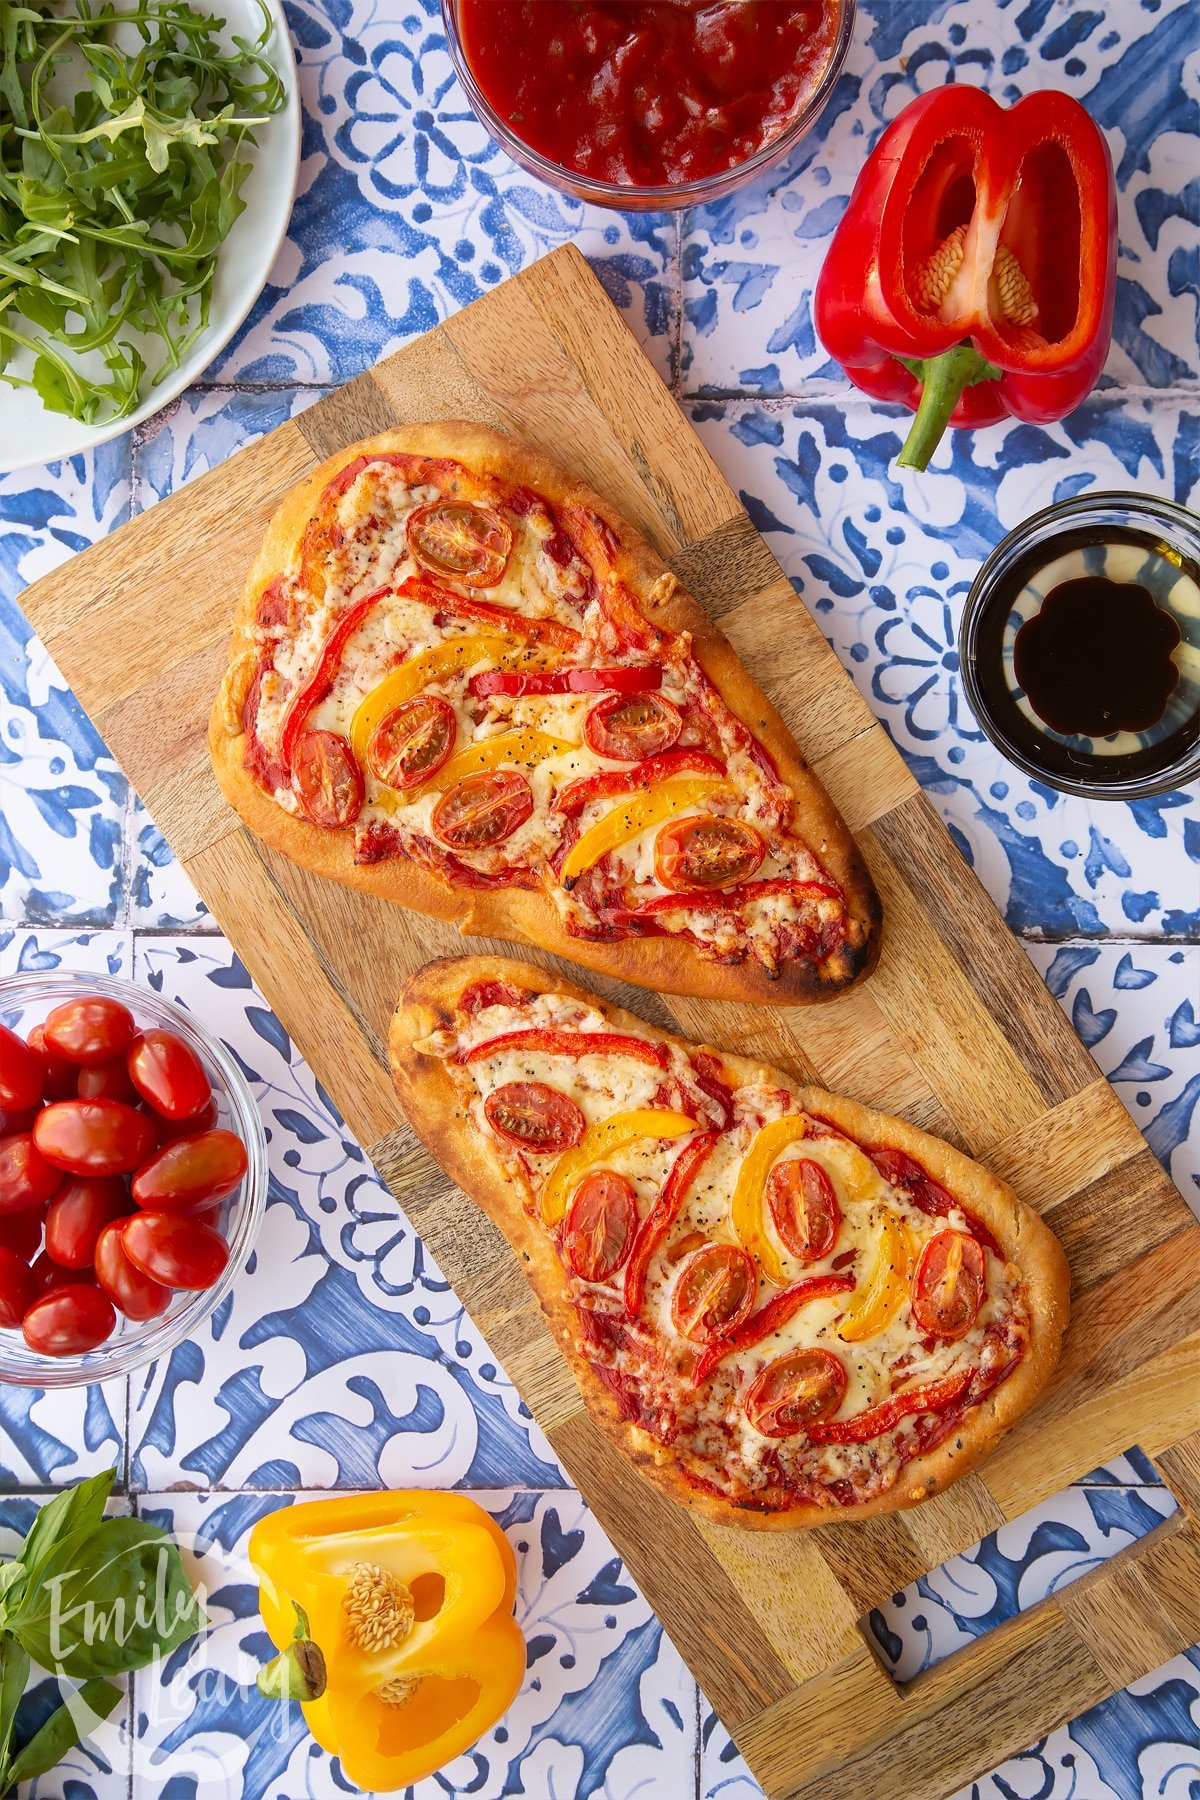 Two Naan bread pizzas on a wooden chopping board which is sat on top of some blue and white decorative tiles. Surrounding the Naan bread pizza are some of the ingredients required for the recipe.